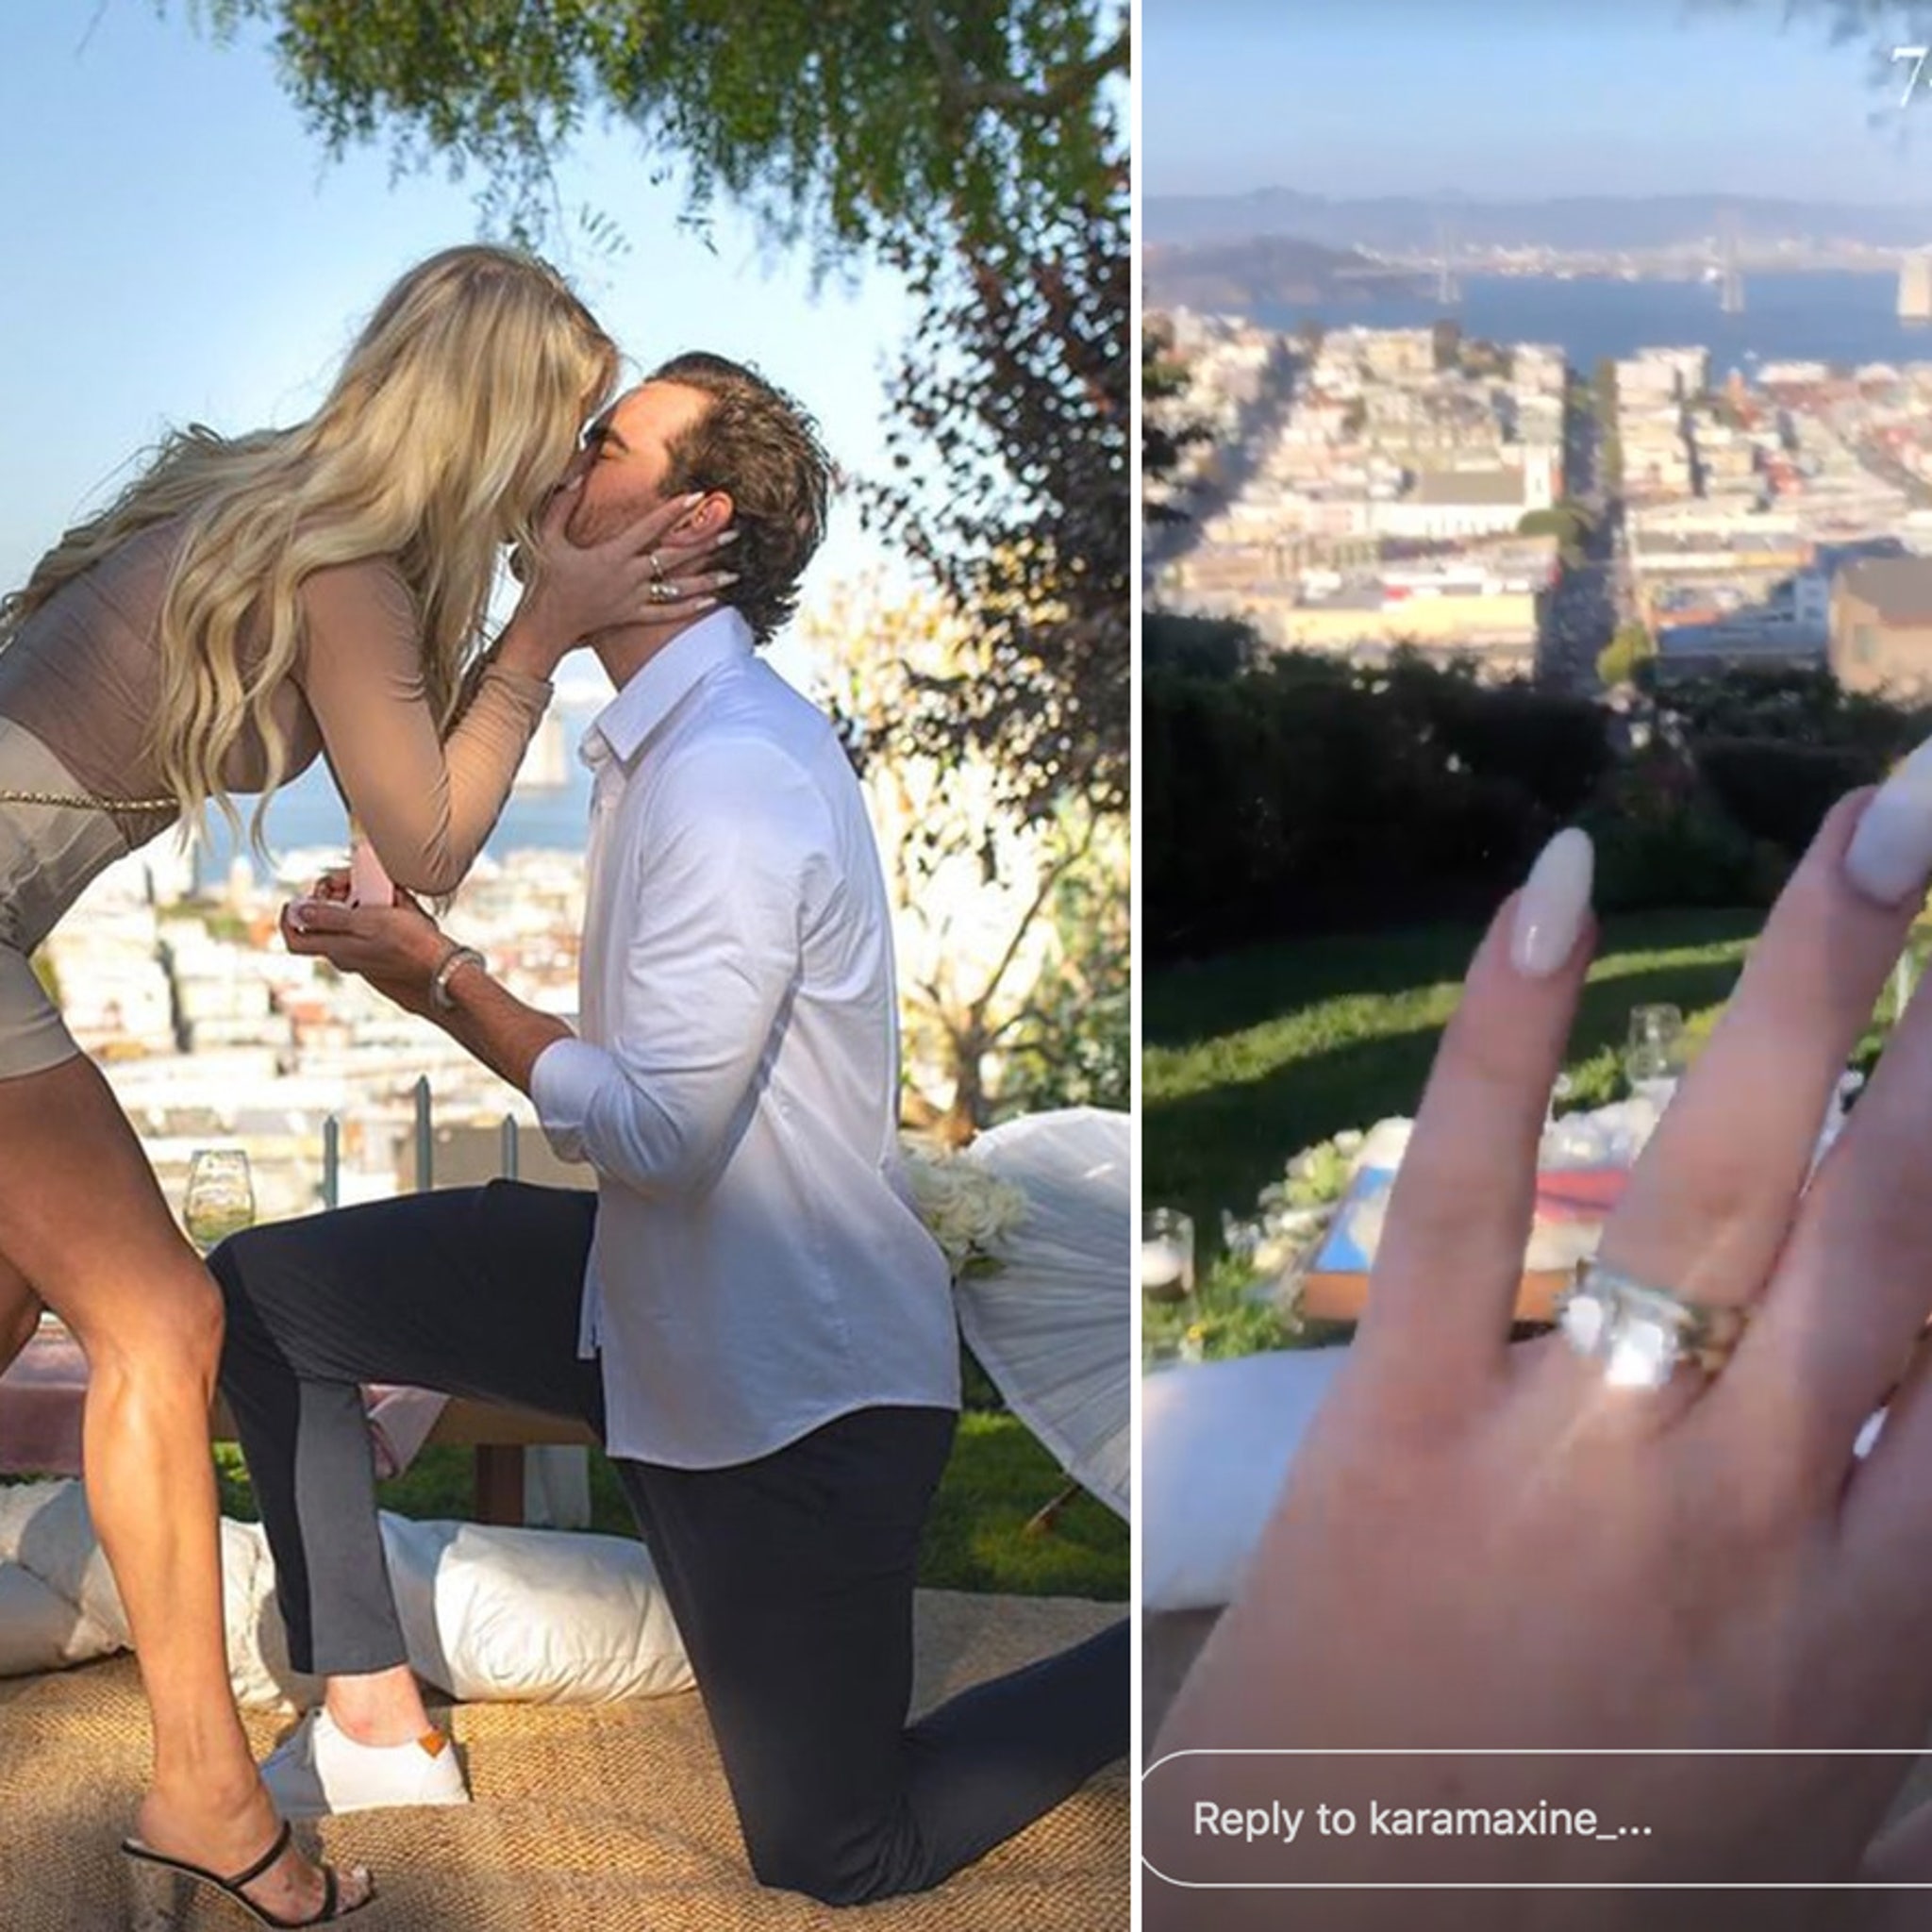 Shane Bieber Engaged To Longtime Girlfriend, 'Forever My Girl